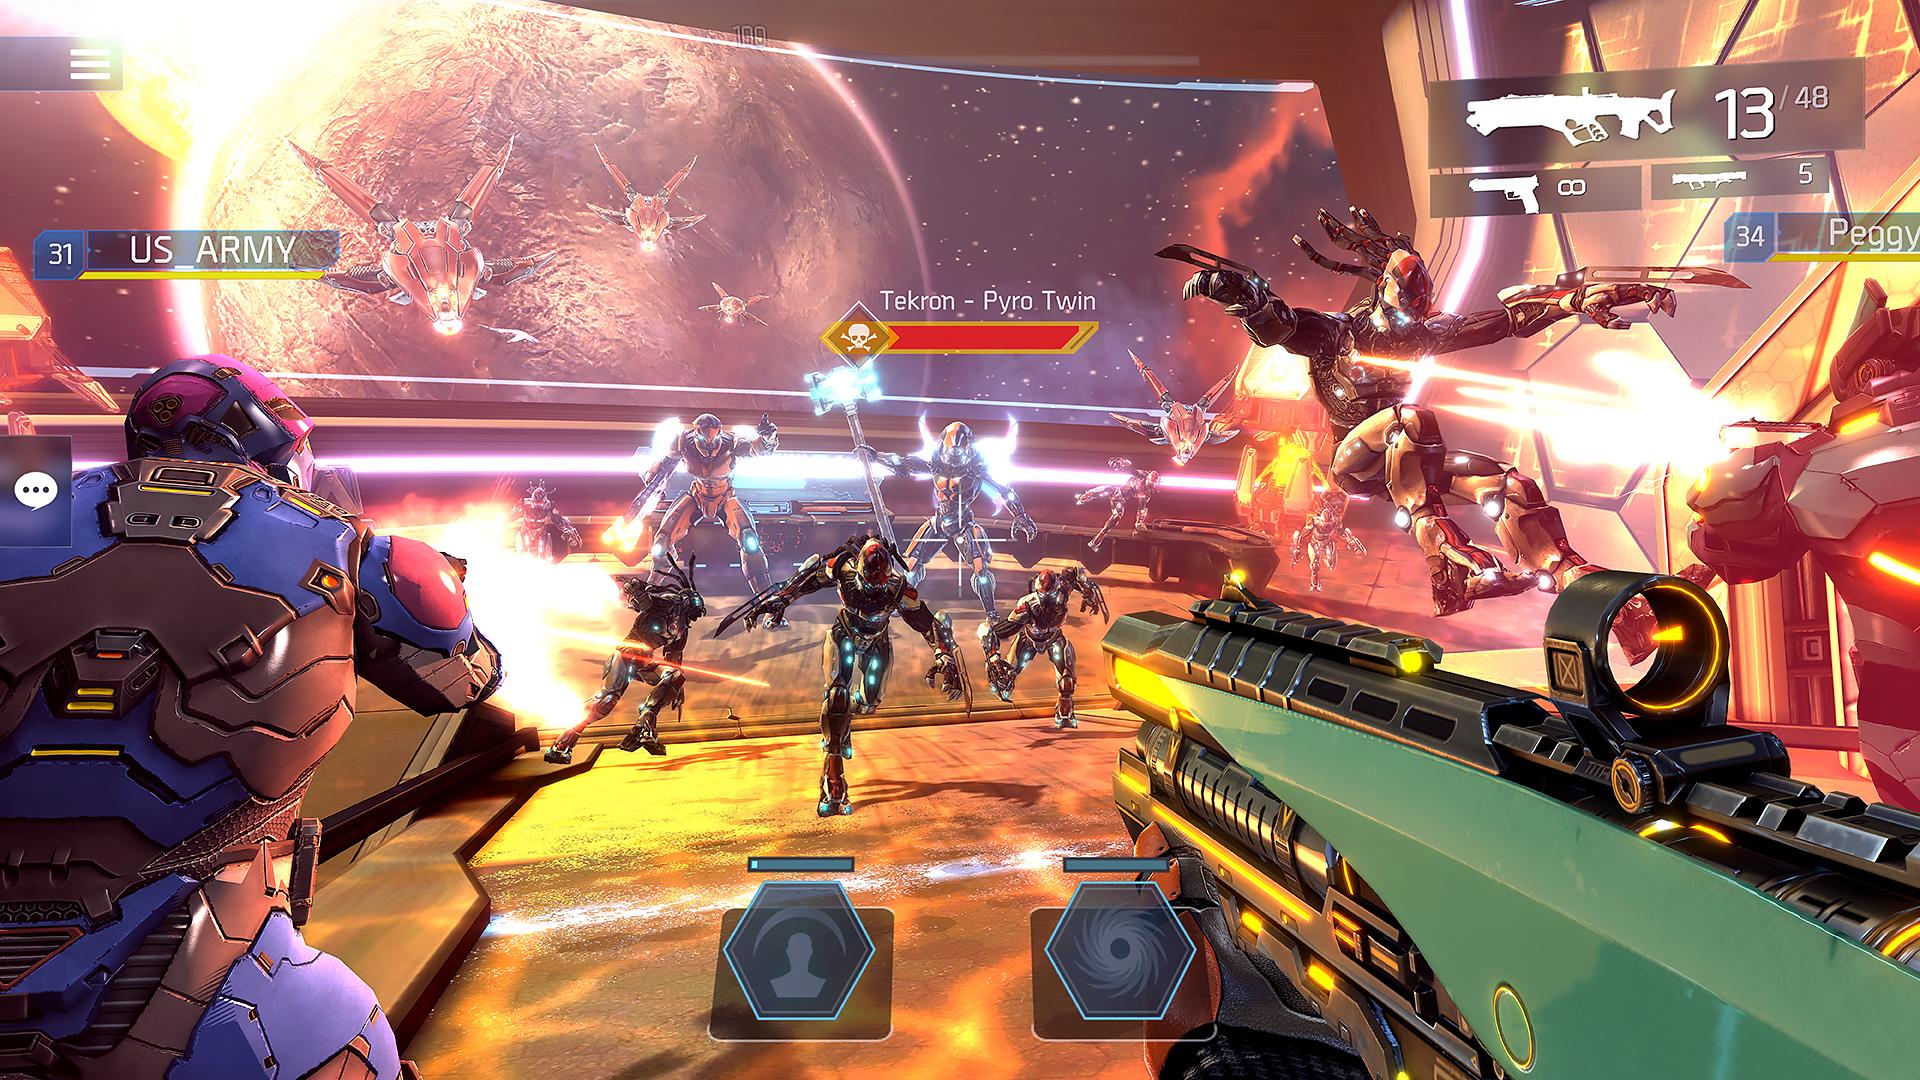 Shadowgun Legends Apk Download Free Action Game For Android Apkpure Com